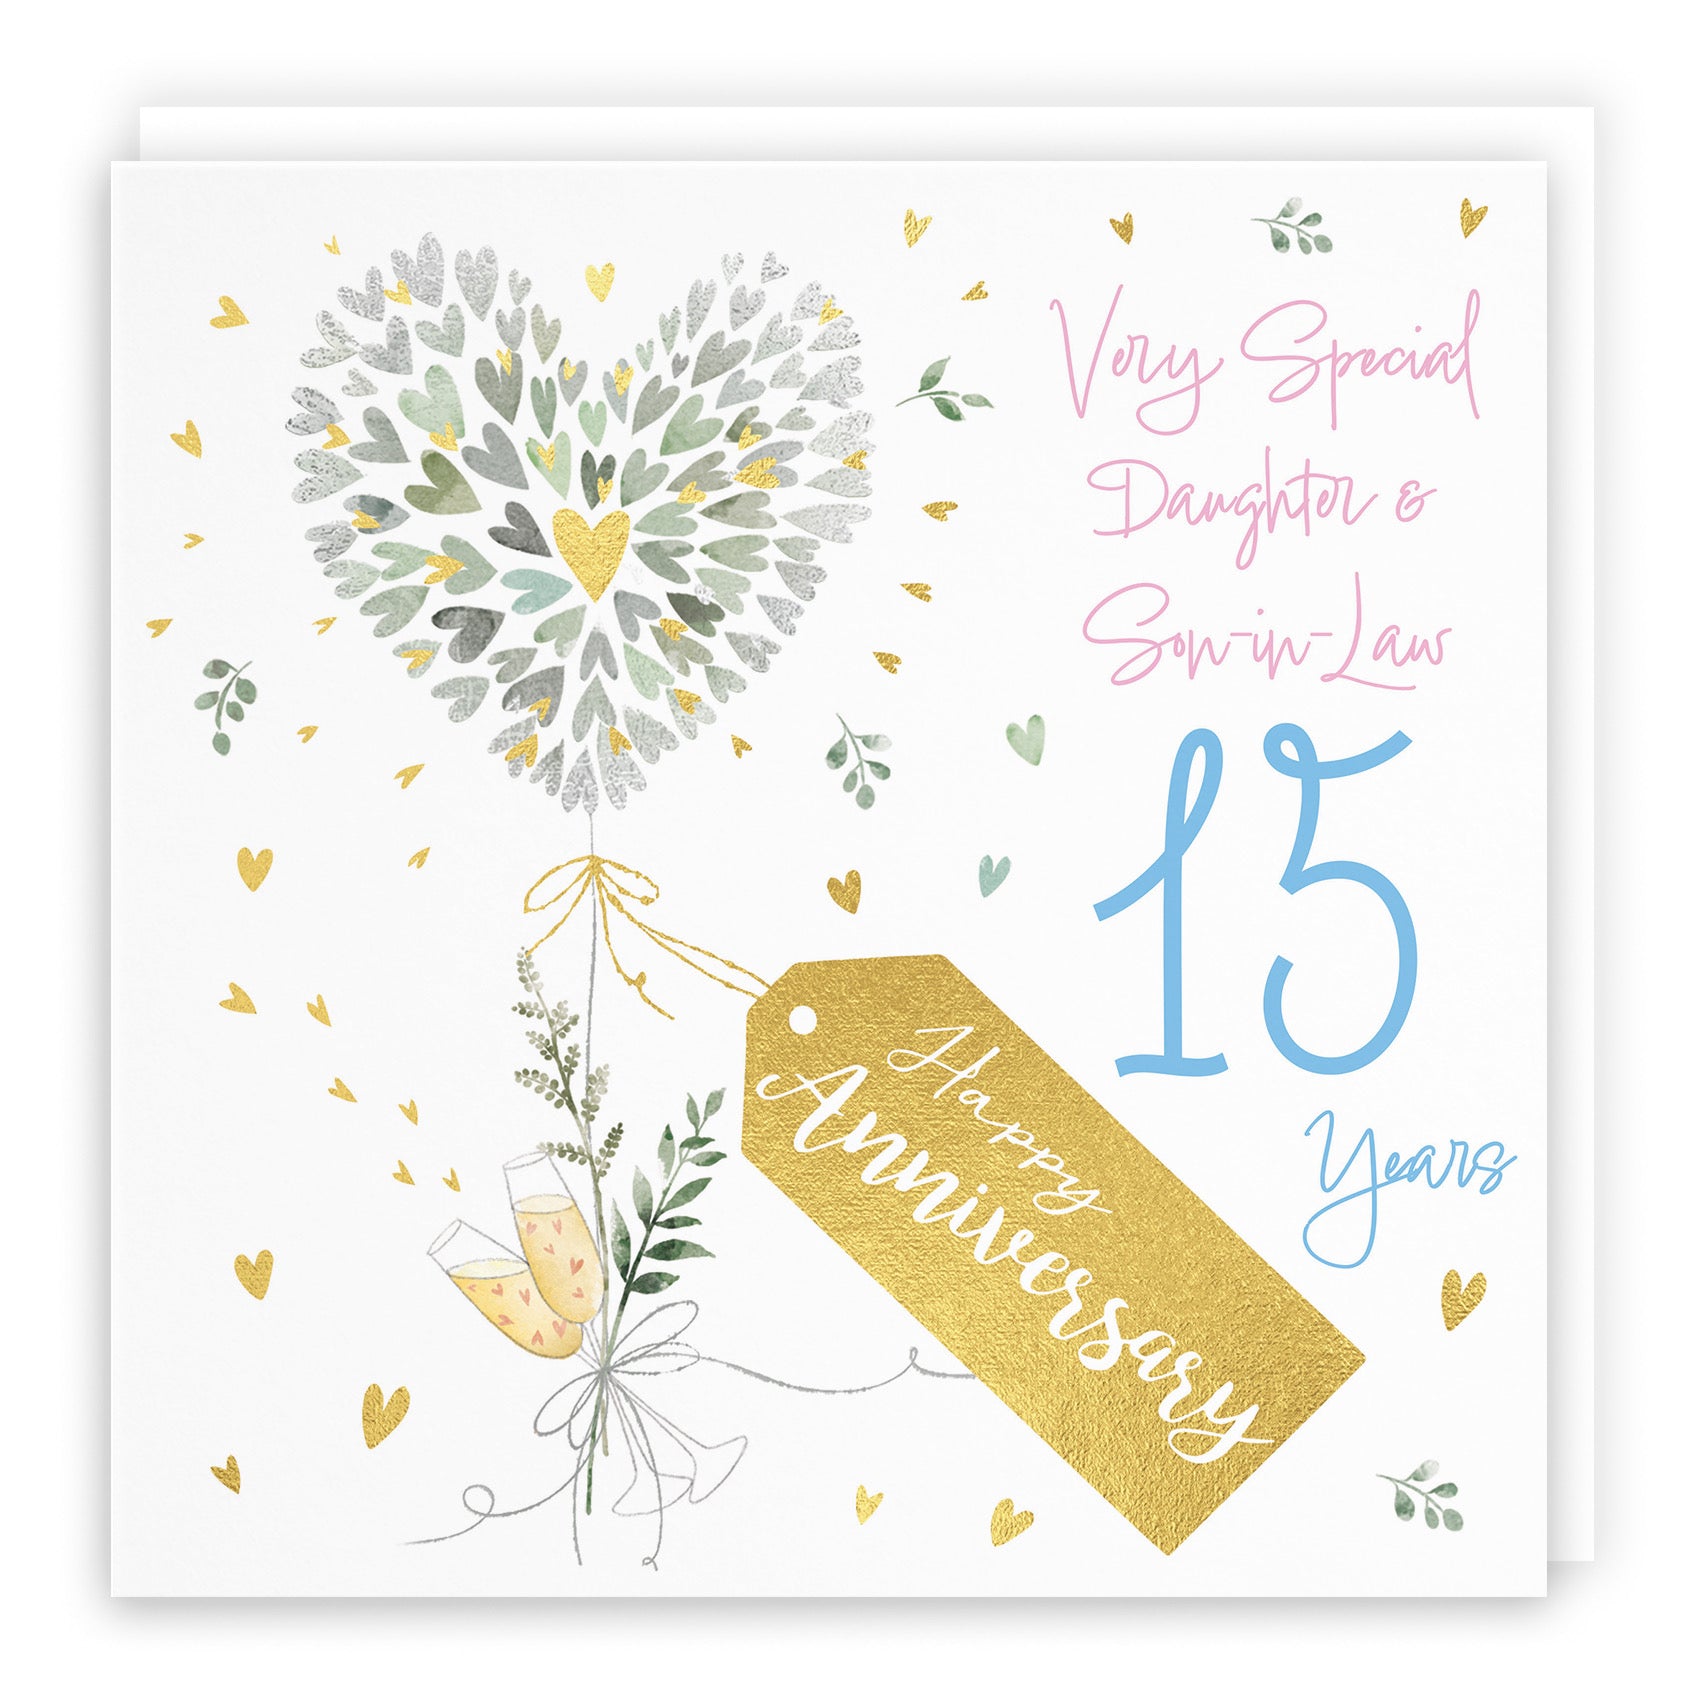 Daughter And Son-in-Law 15th Anniversary Card Contemporary Hearts Milo's Gallery - Default Title (B0CKJ62VLD)